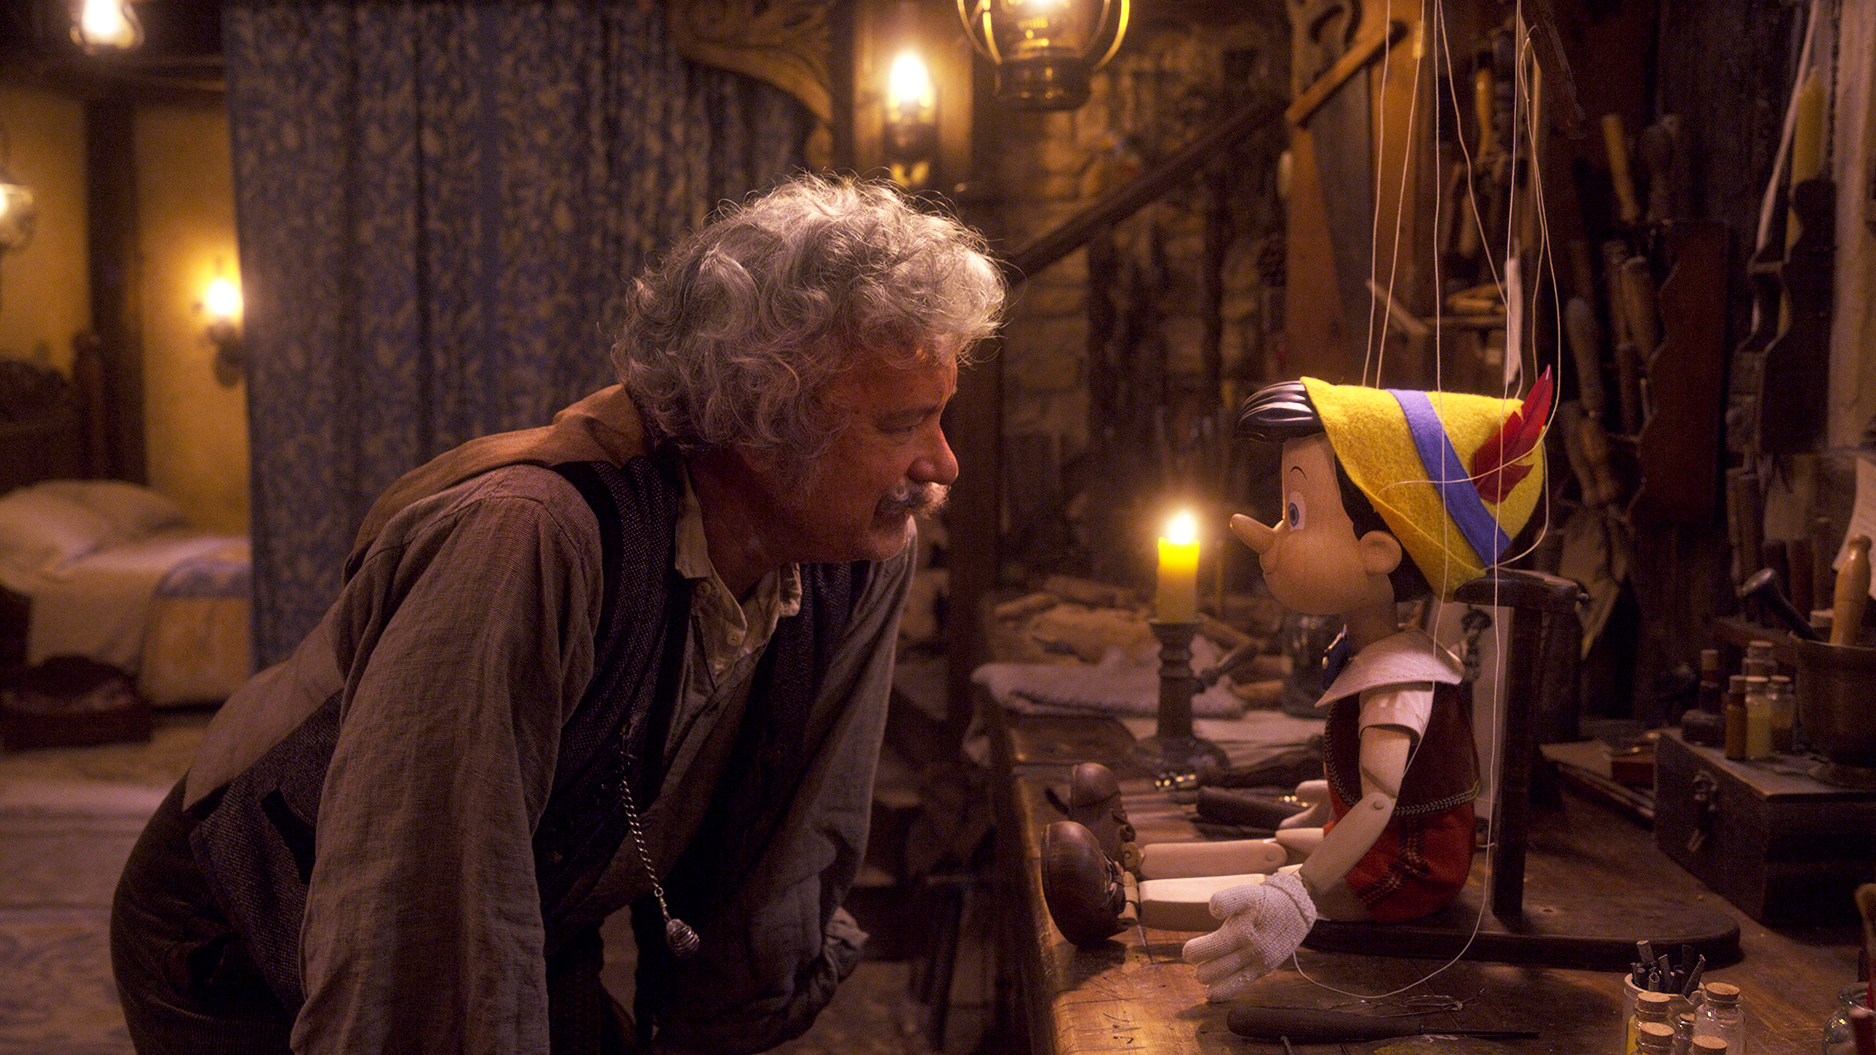 Tom Hanks as Geppetto with Pinocchio in the live action Pinocchio movie